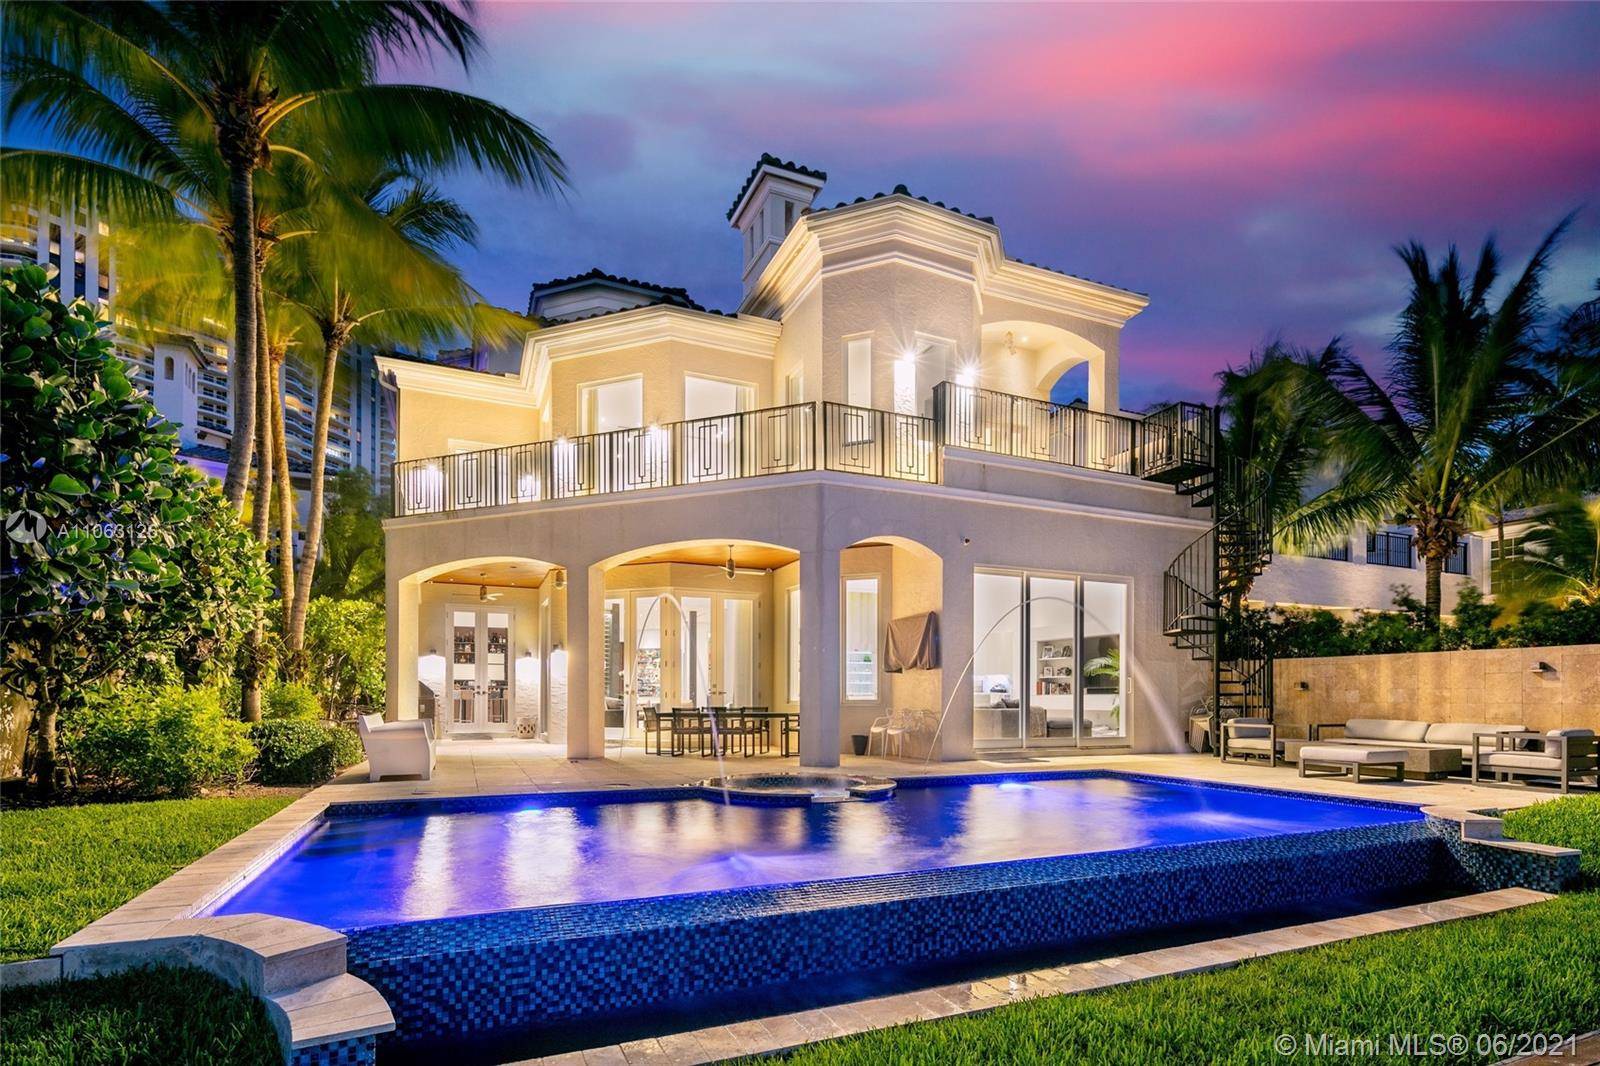 Three story modern masterpiece featuring 6BD 7BA in the exclusive Island Estates gated community.